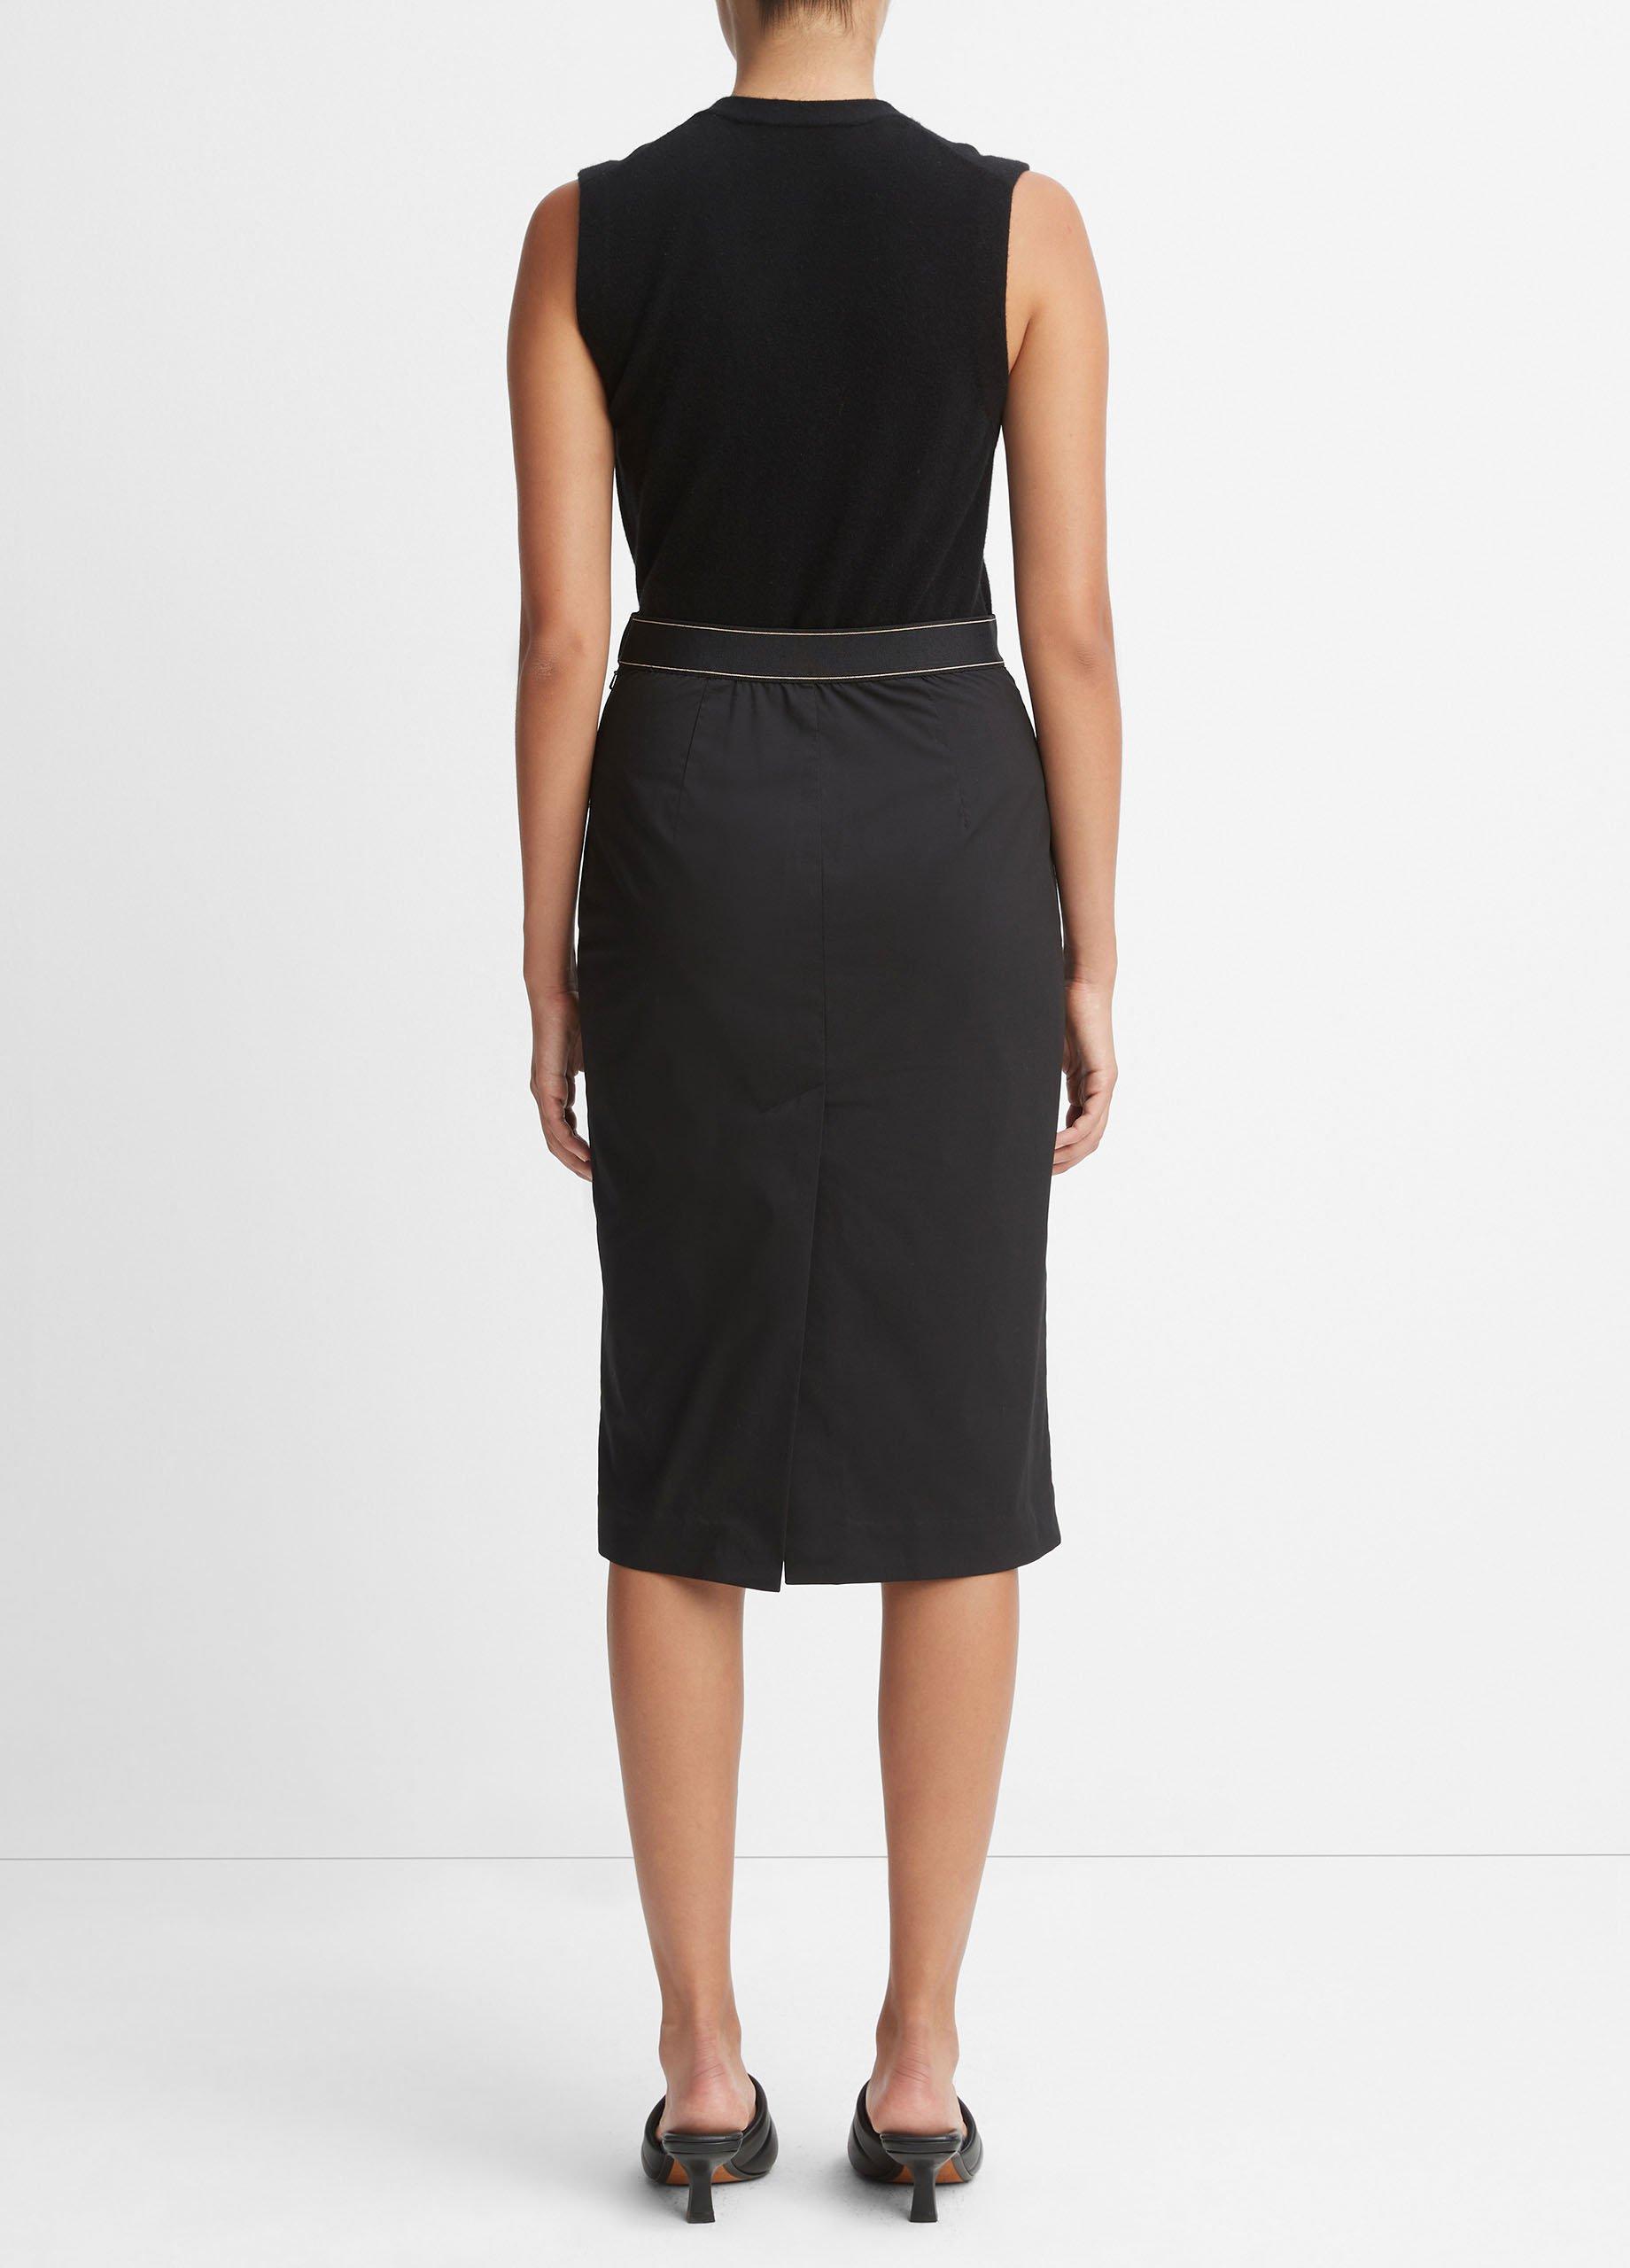 Pull-On Pencil Skirt in Dresses | Skirts Vince 